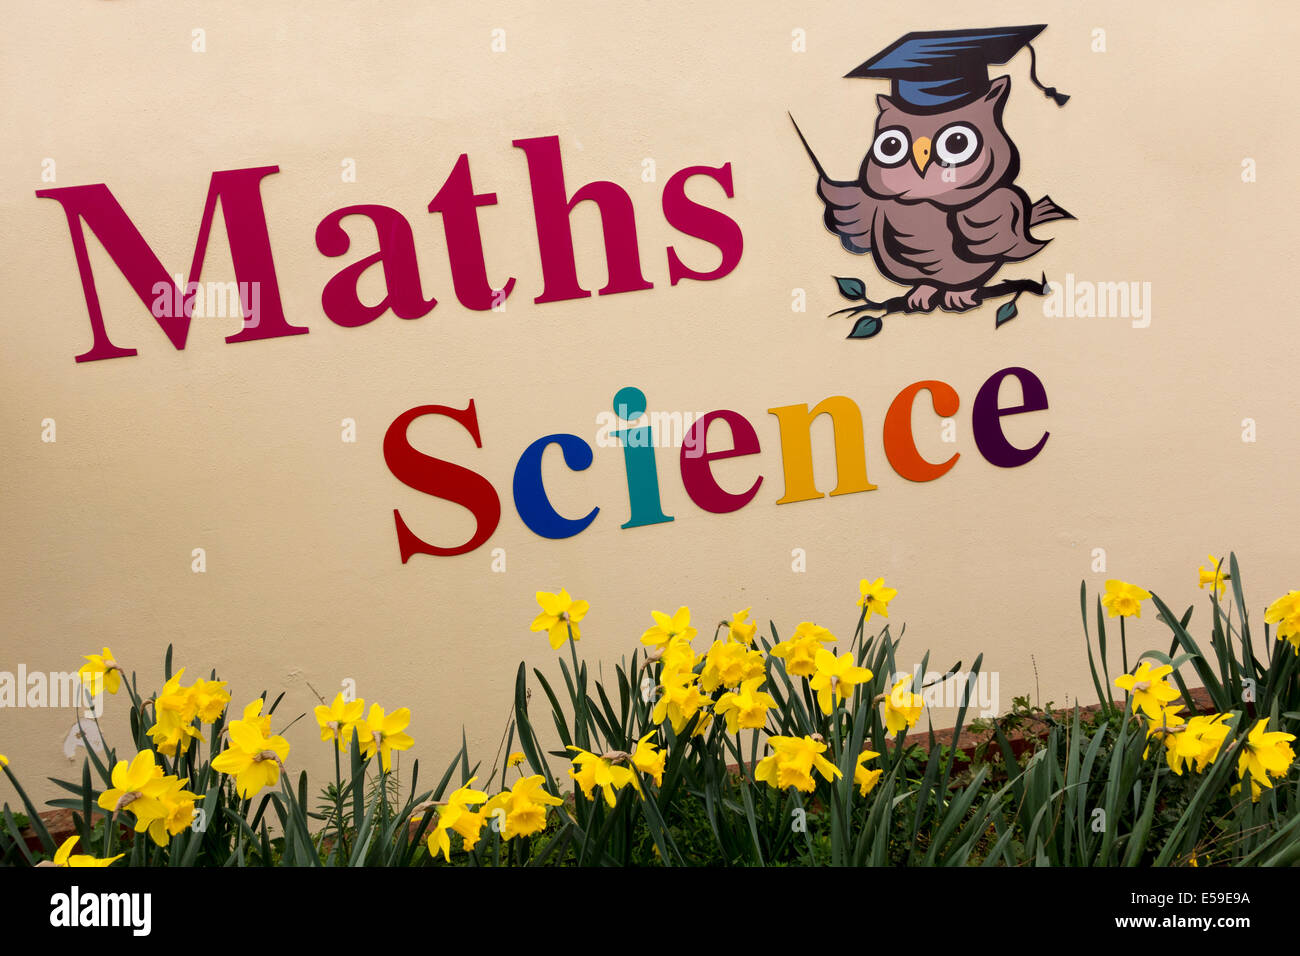 Maths and Science private tutoring sign, UK Stock Photo